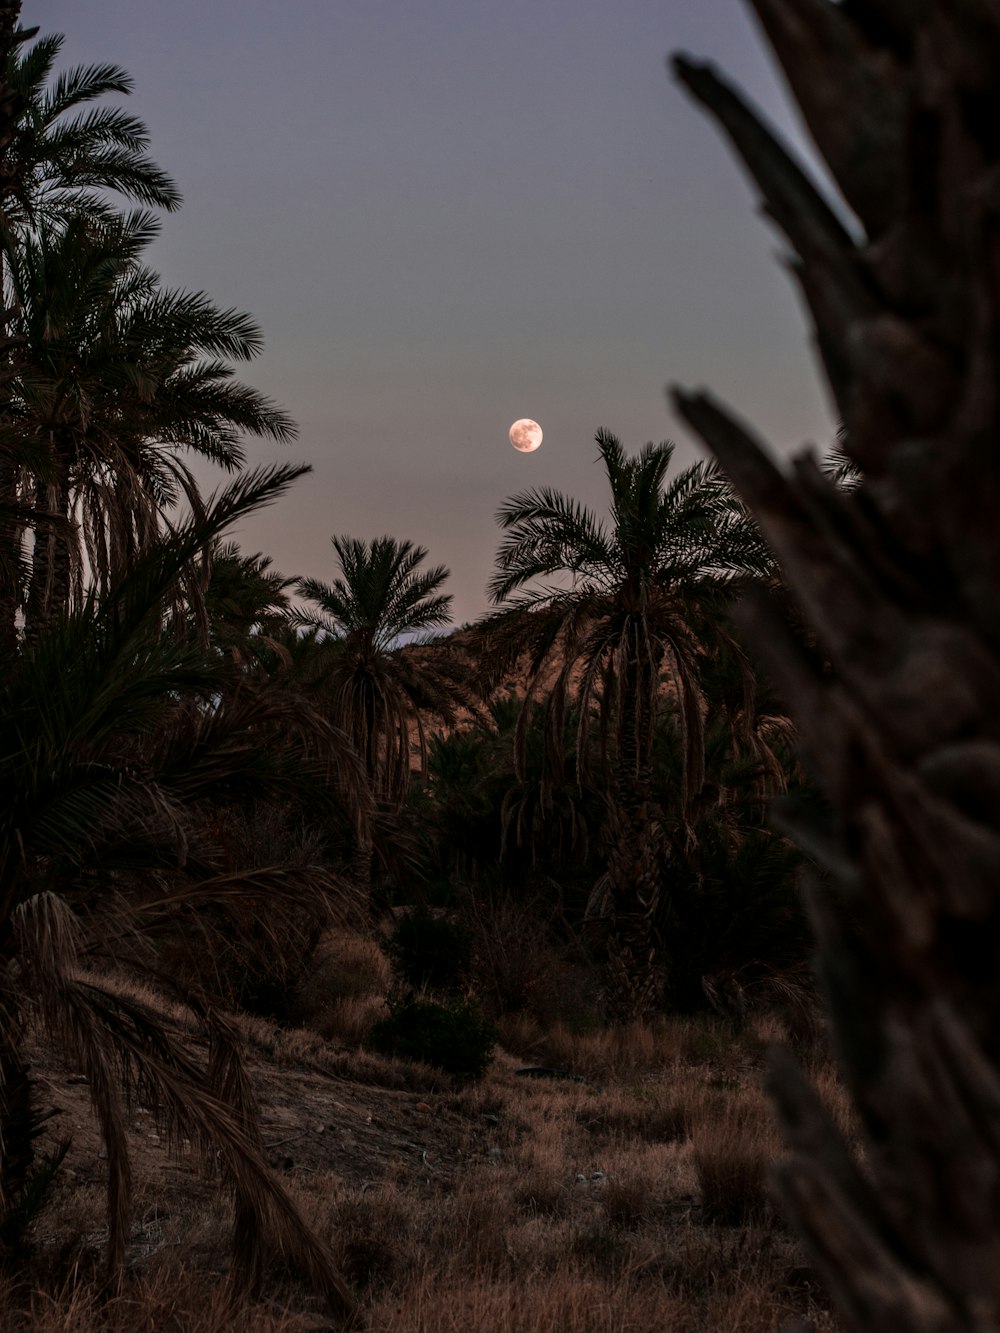 a full moon is seen in the distance behind palm trees